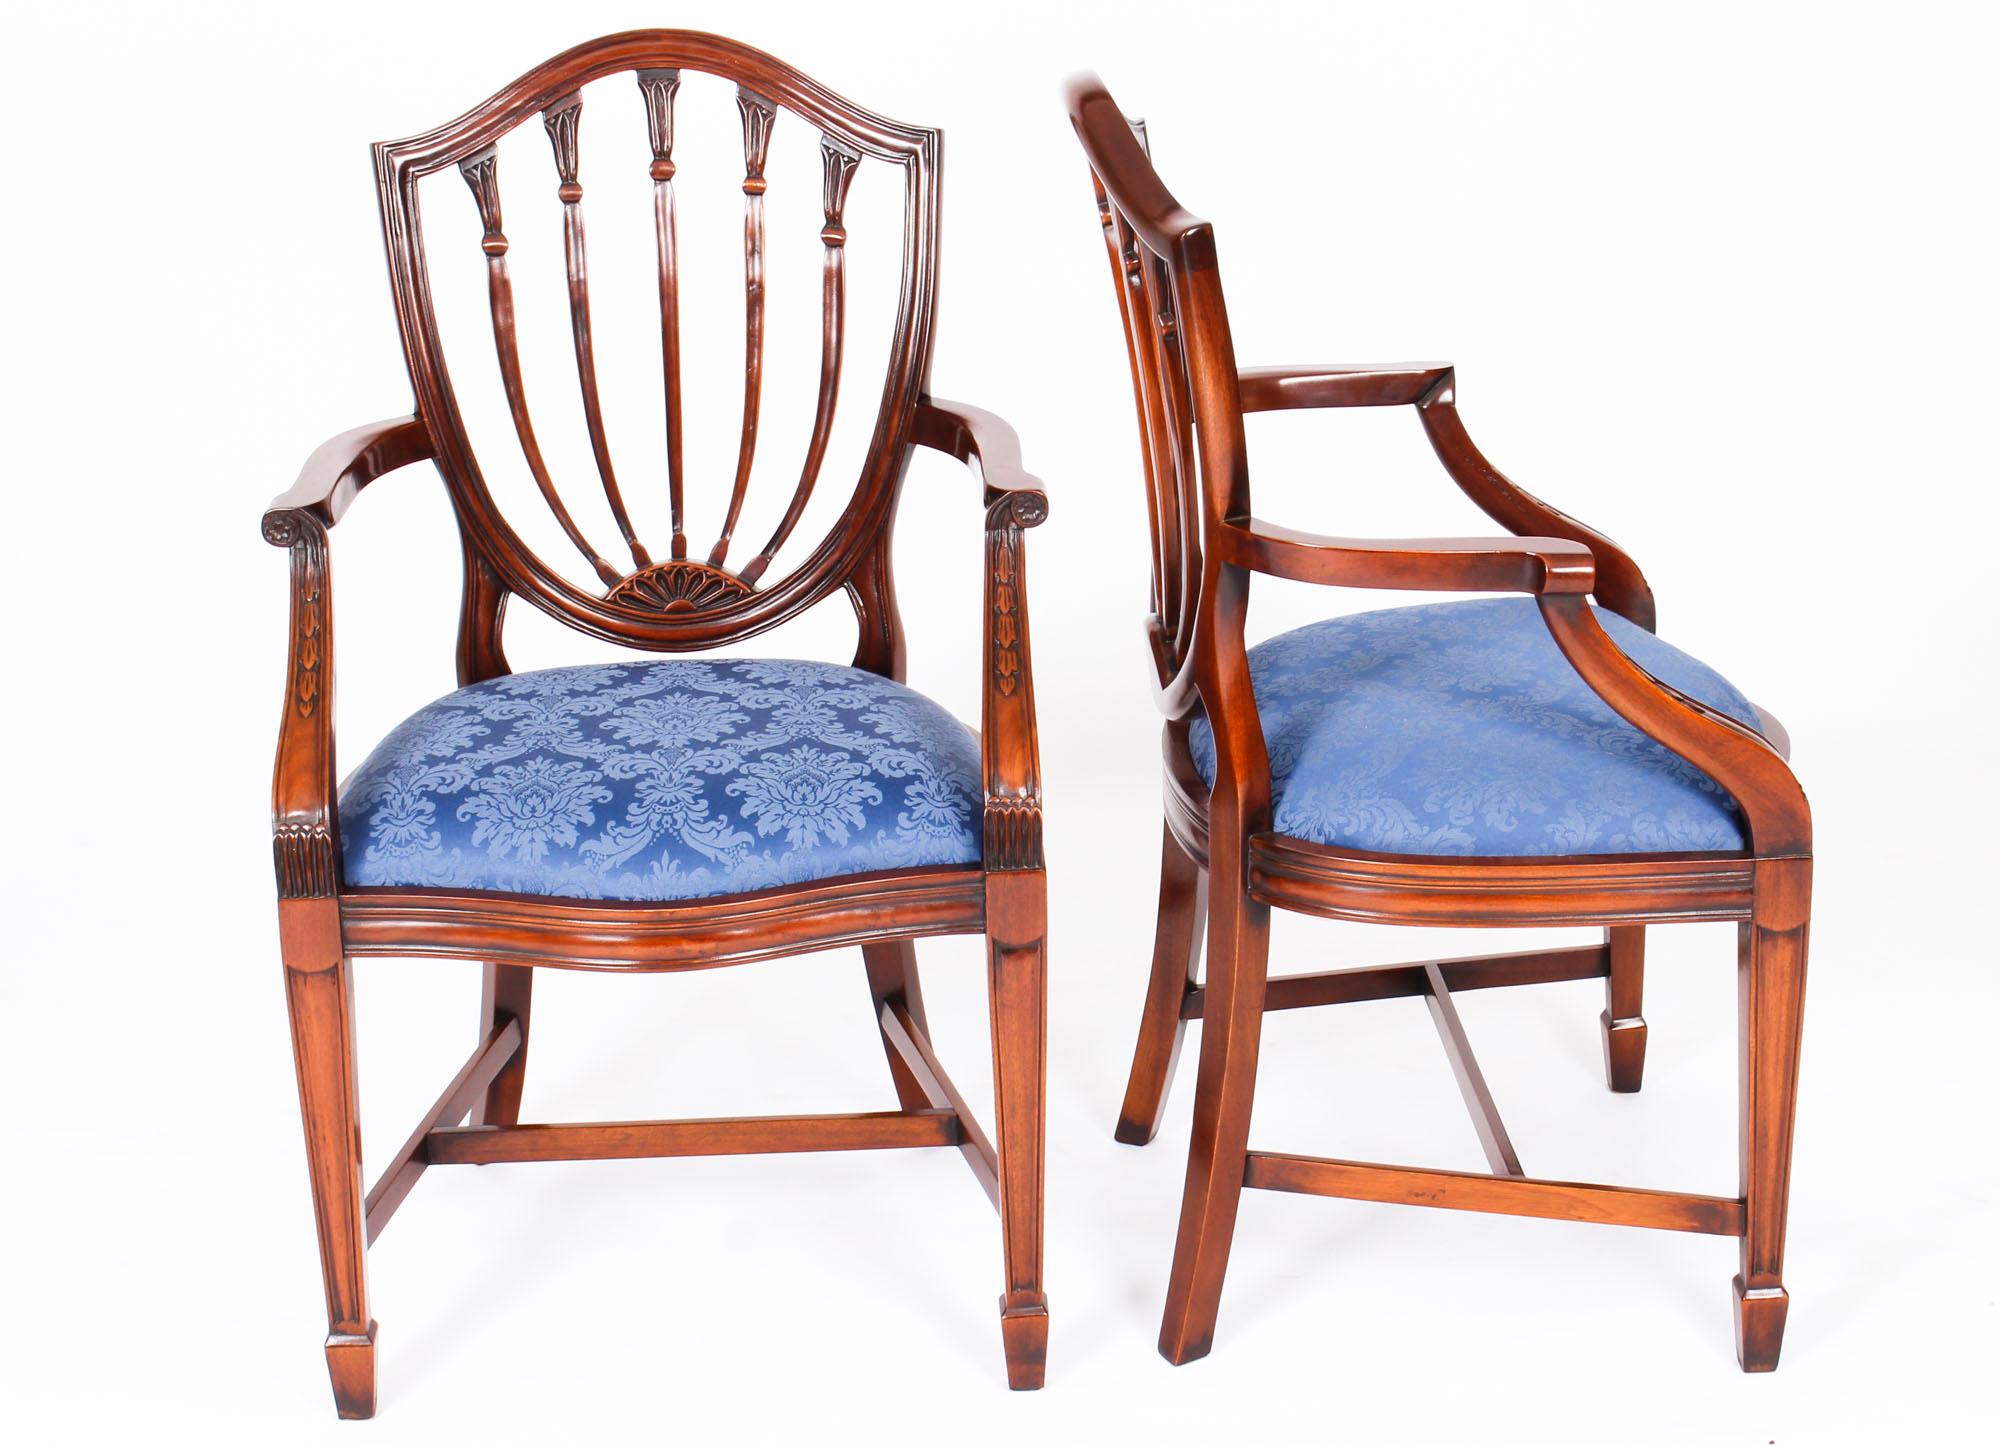 An absolutely fantastic Vintage set of eighteen Hepplewhite Revival dining chairs.

Beautifully hand crafted from solid mahogany the set comprises sixteen side chairs and two armchairs, all of which feature an attractive shieldback design and 'drop